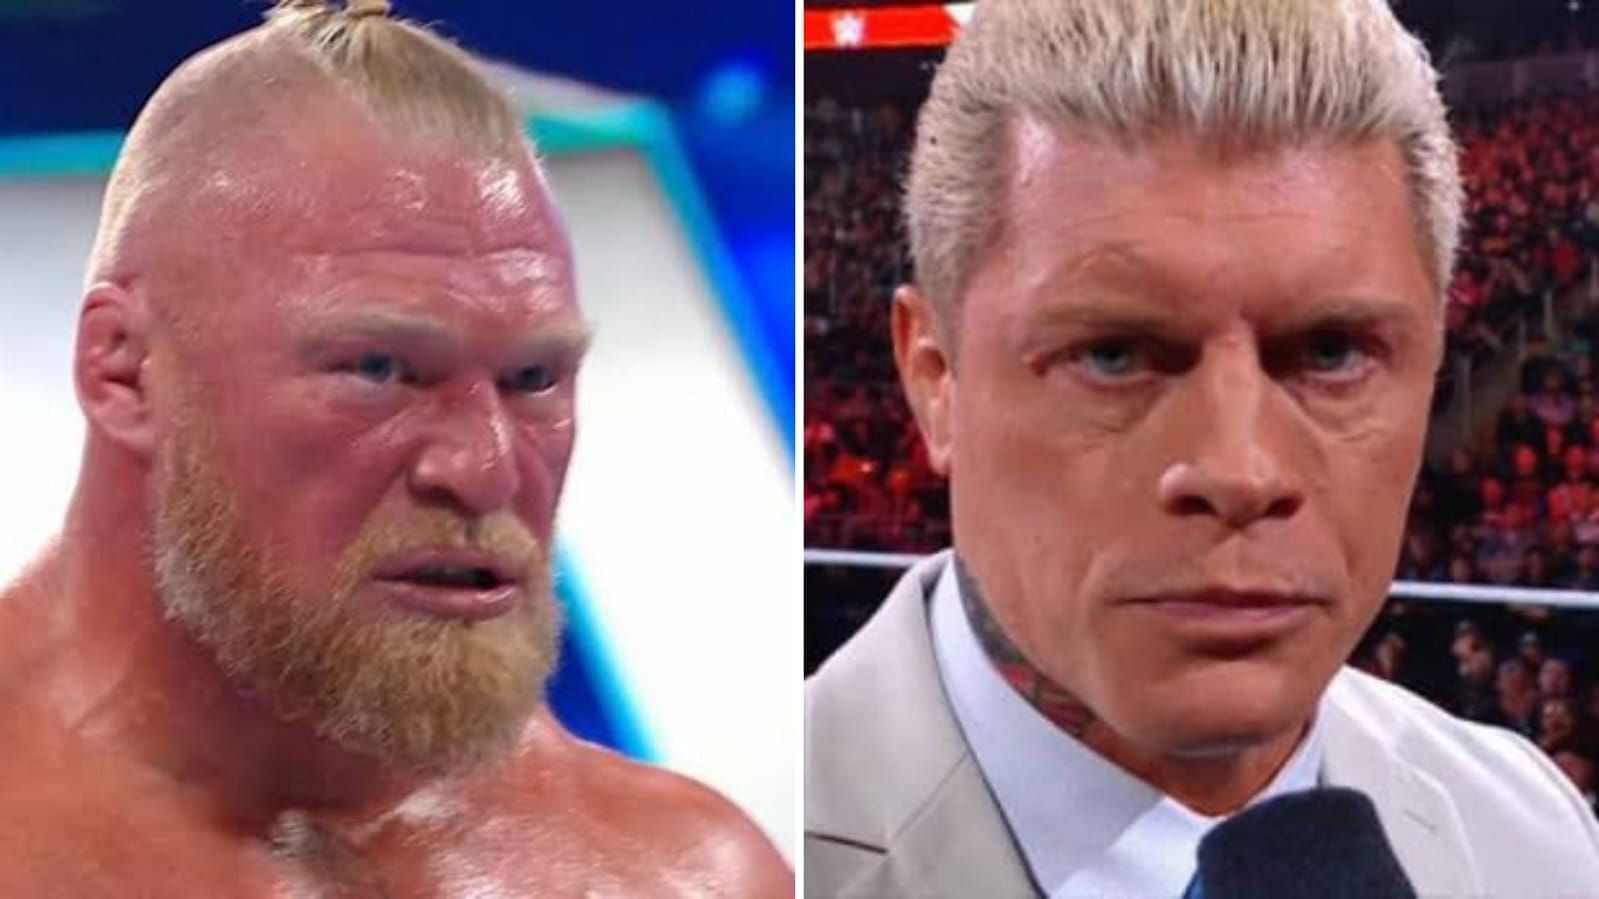 Brock Lesnar and Cody Rhodes could tear the house down at SummerSlam.